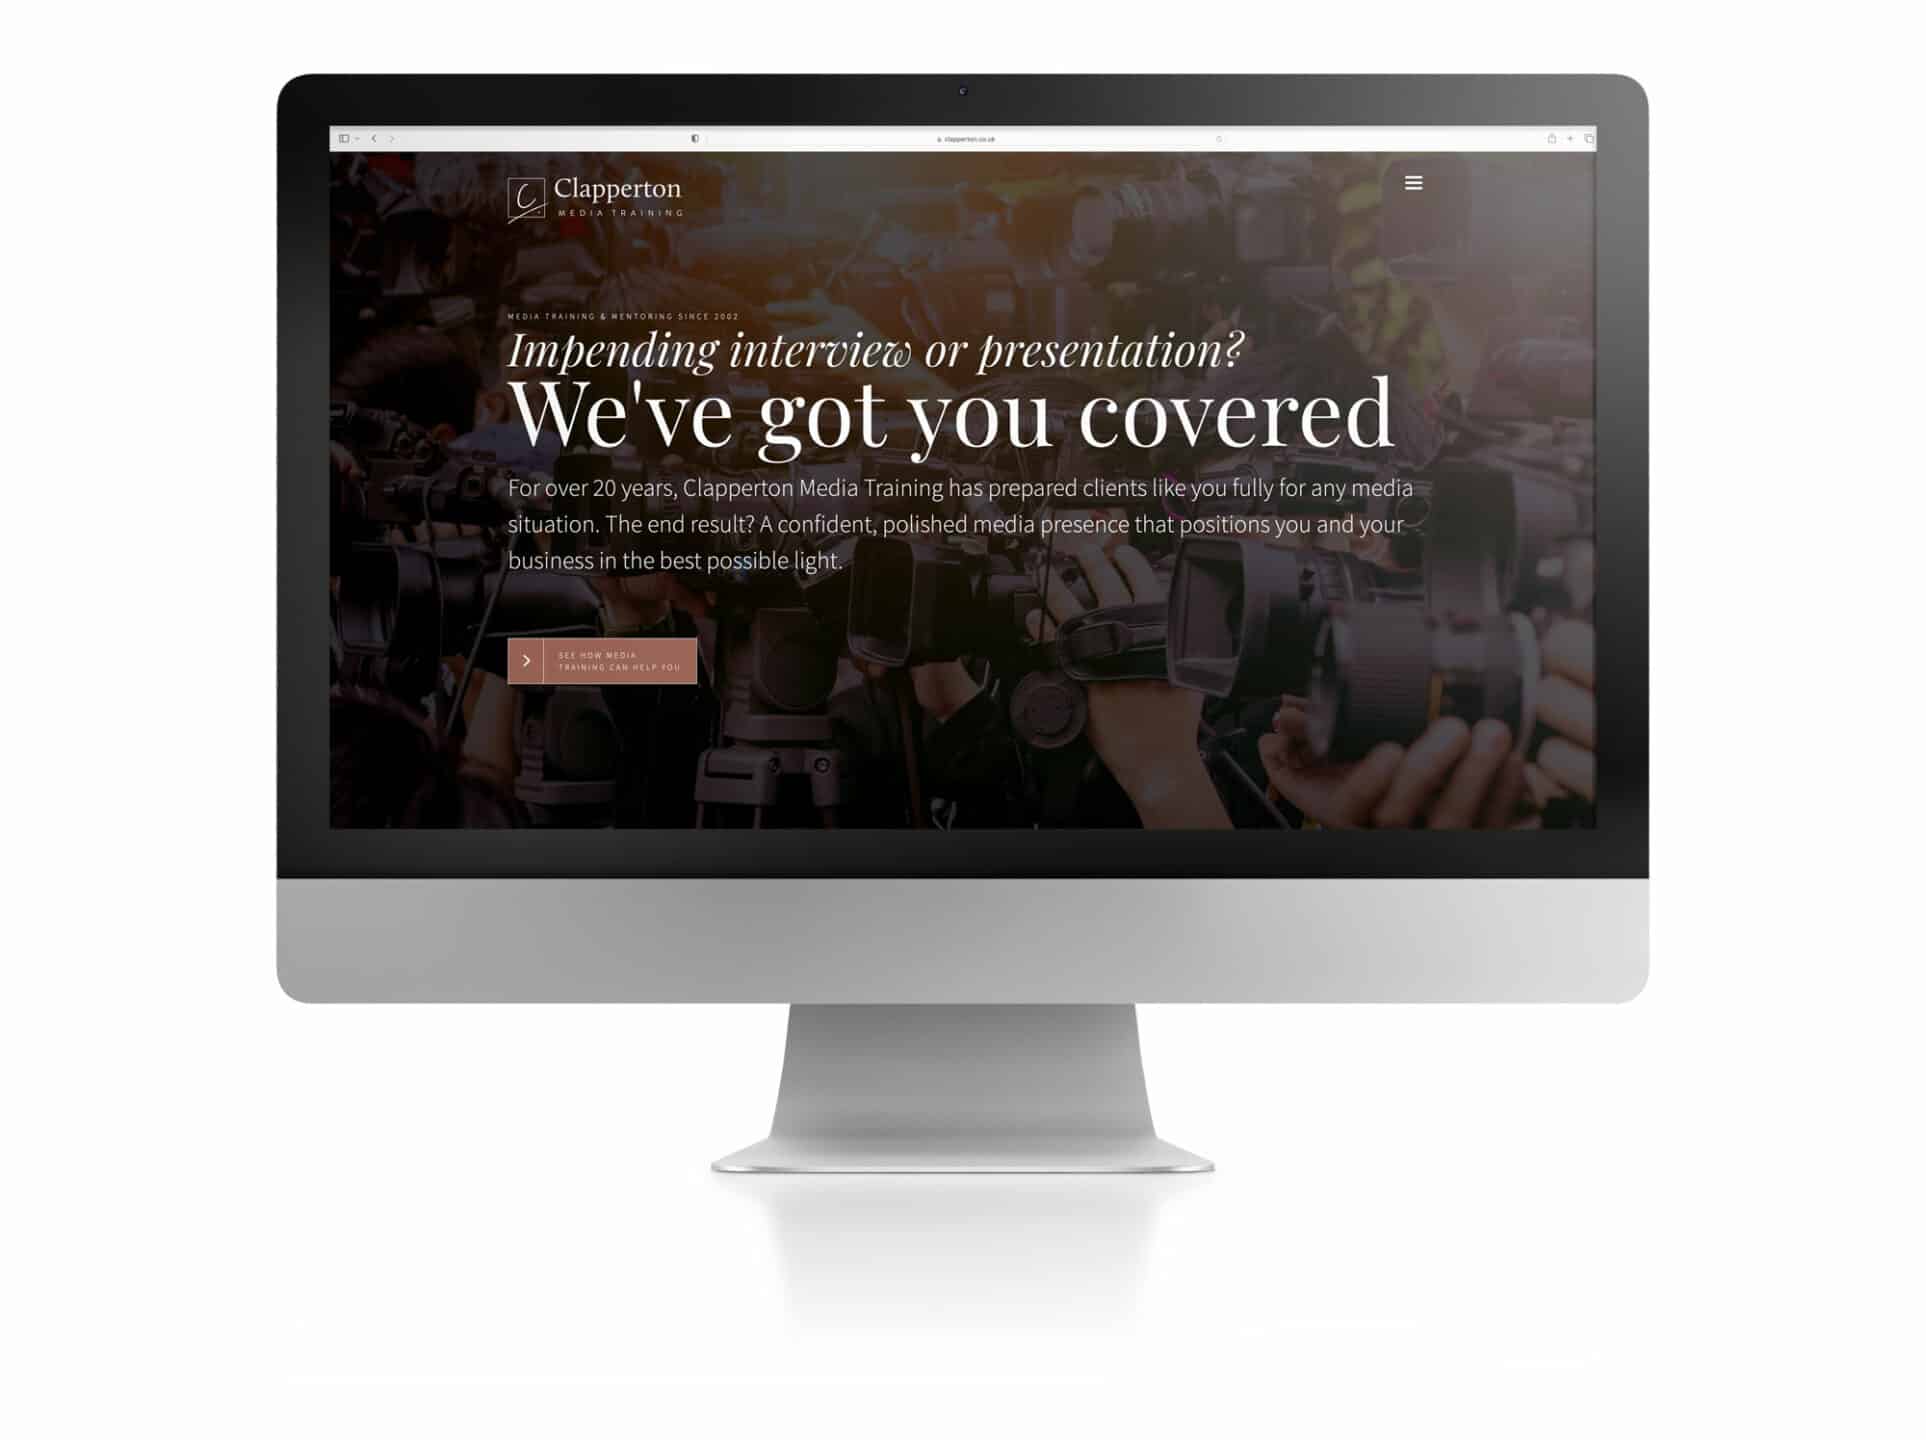 The Clapperton Media website home page displayed on an iMac